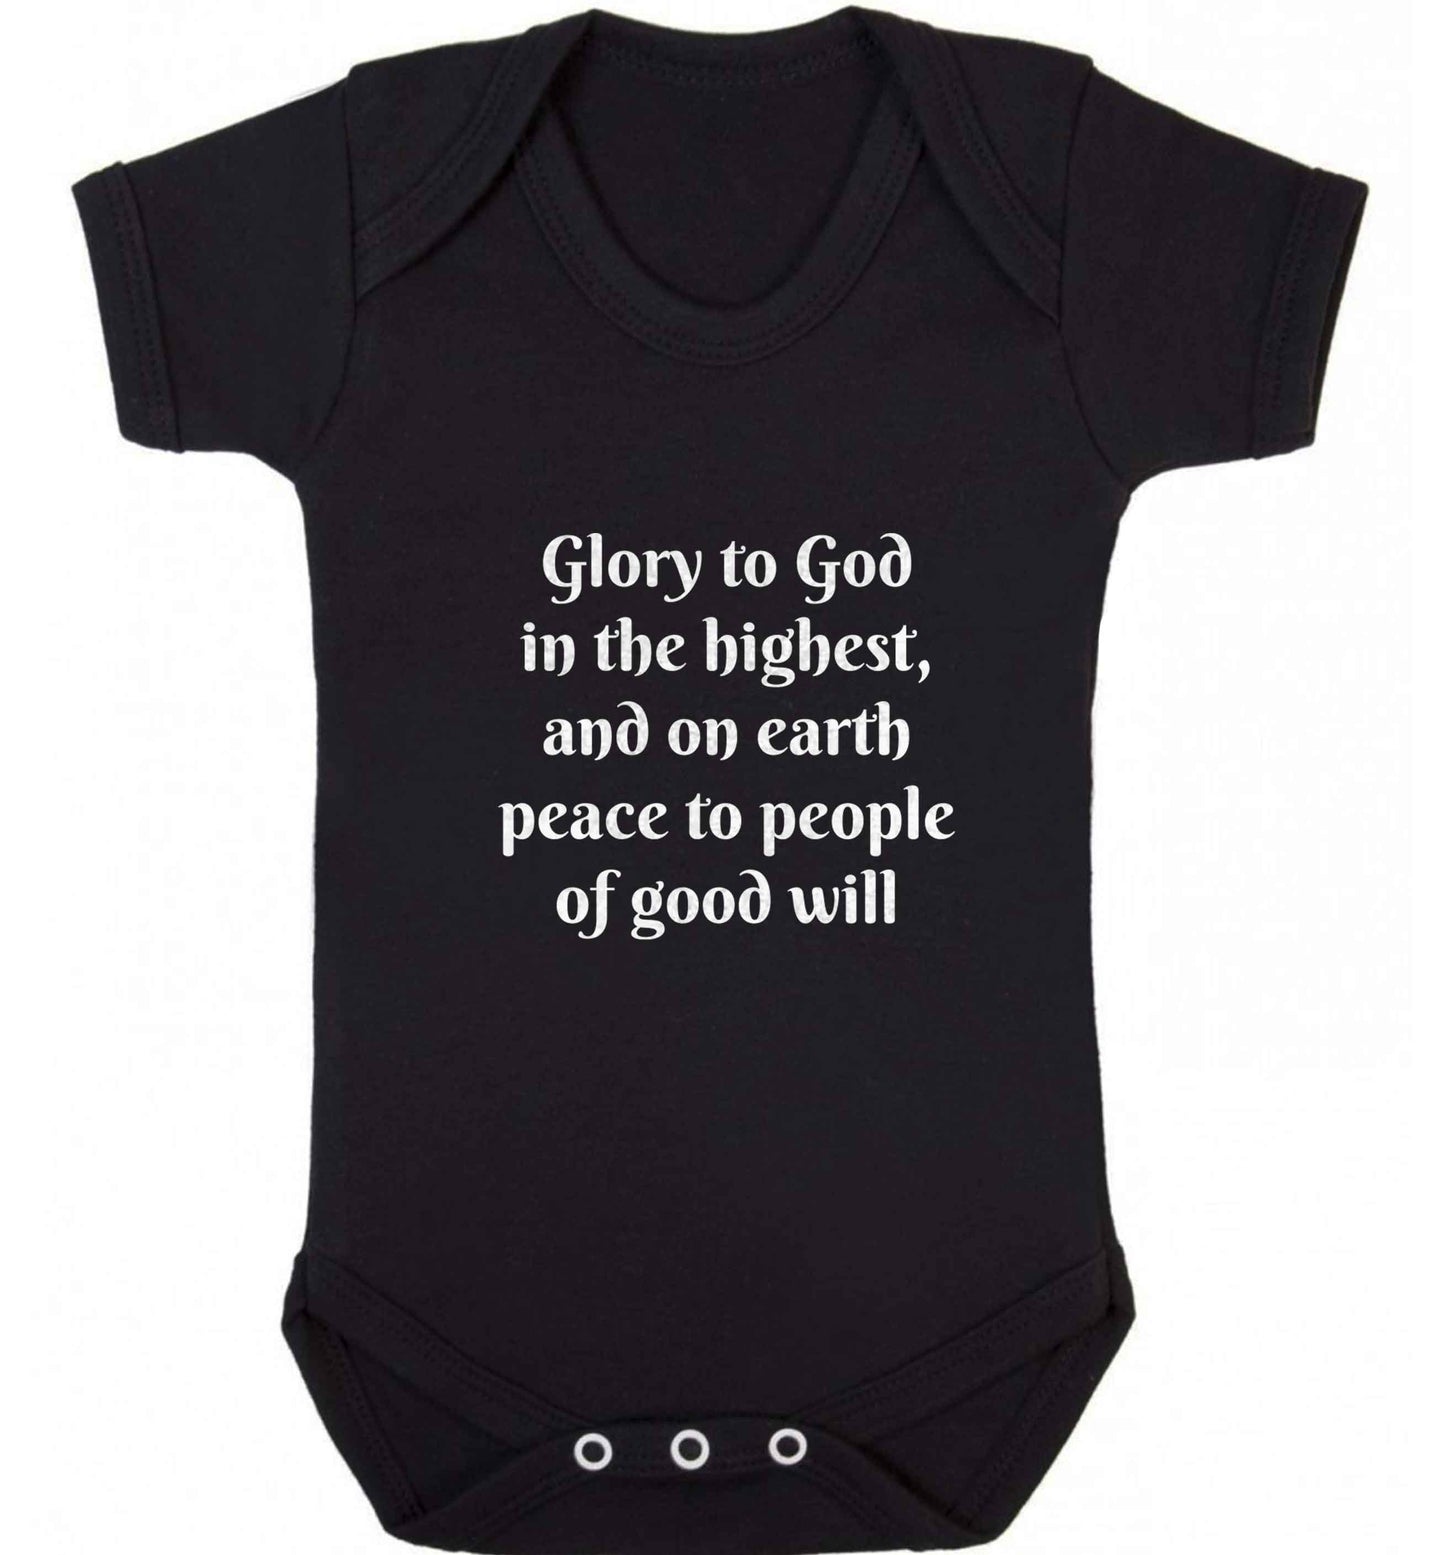 Glory to God in the highest, and on earth peace to people of good will baby vest black 18-24 months